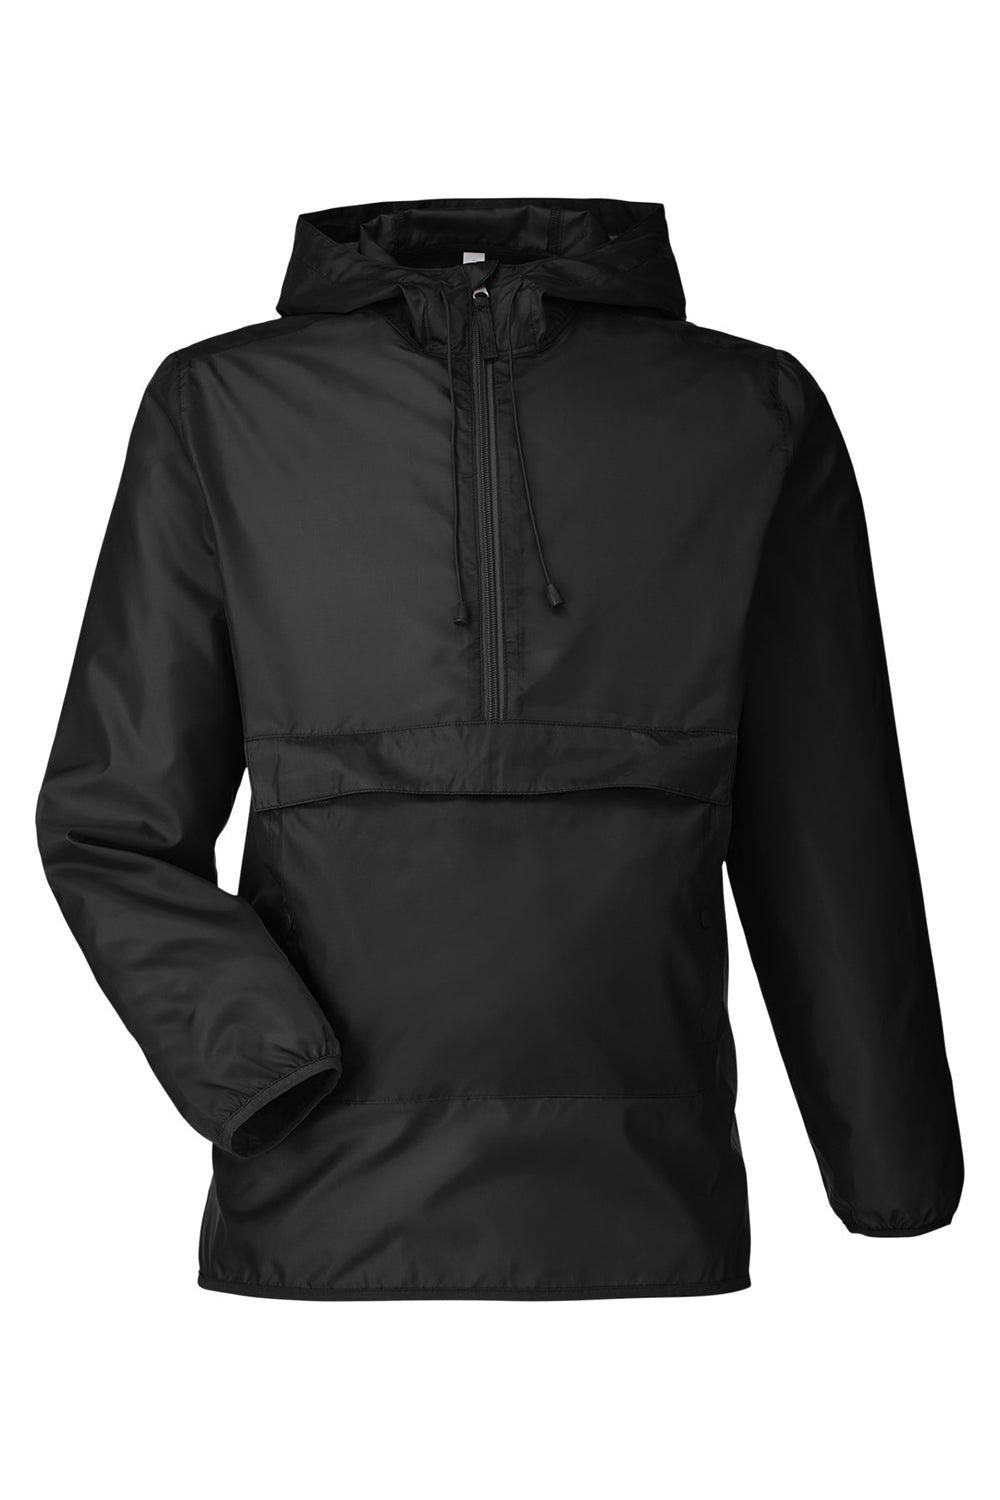 Team 365 TT77 Mens Zone Protect Hooded Packable Anorak Jacket Black Flat Front